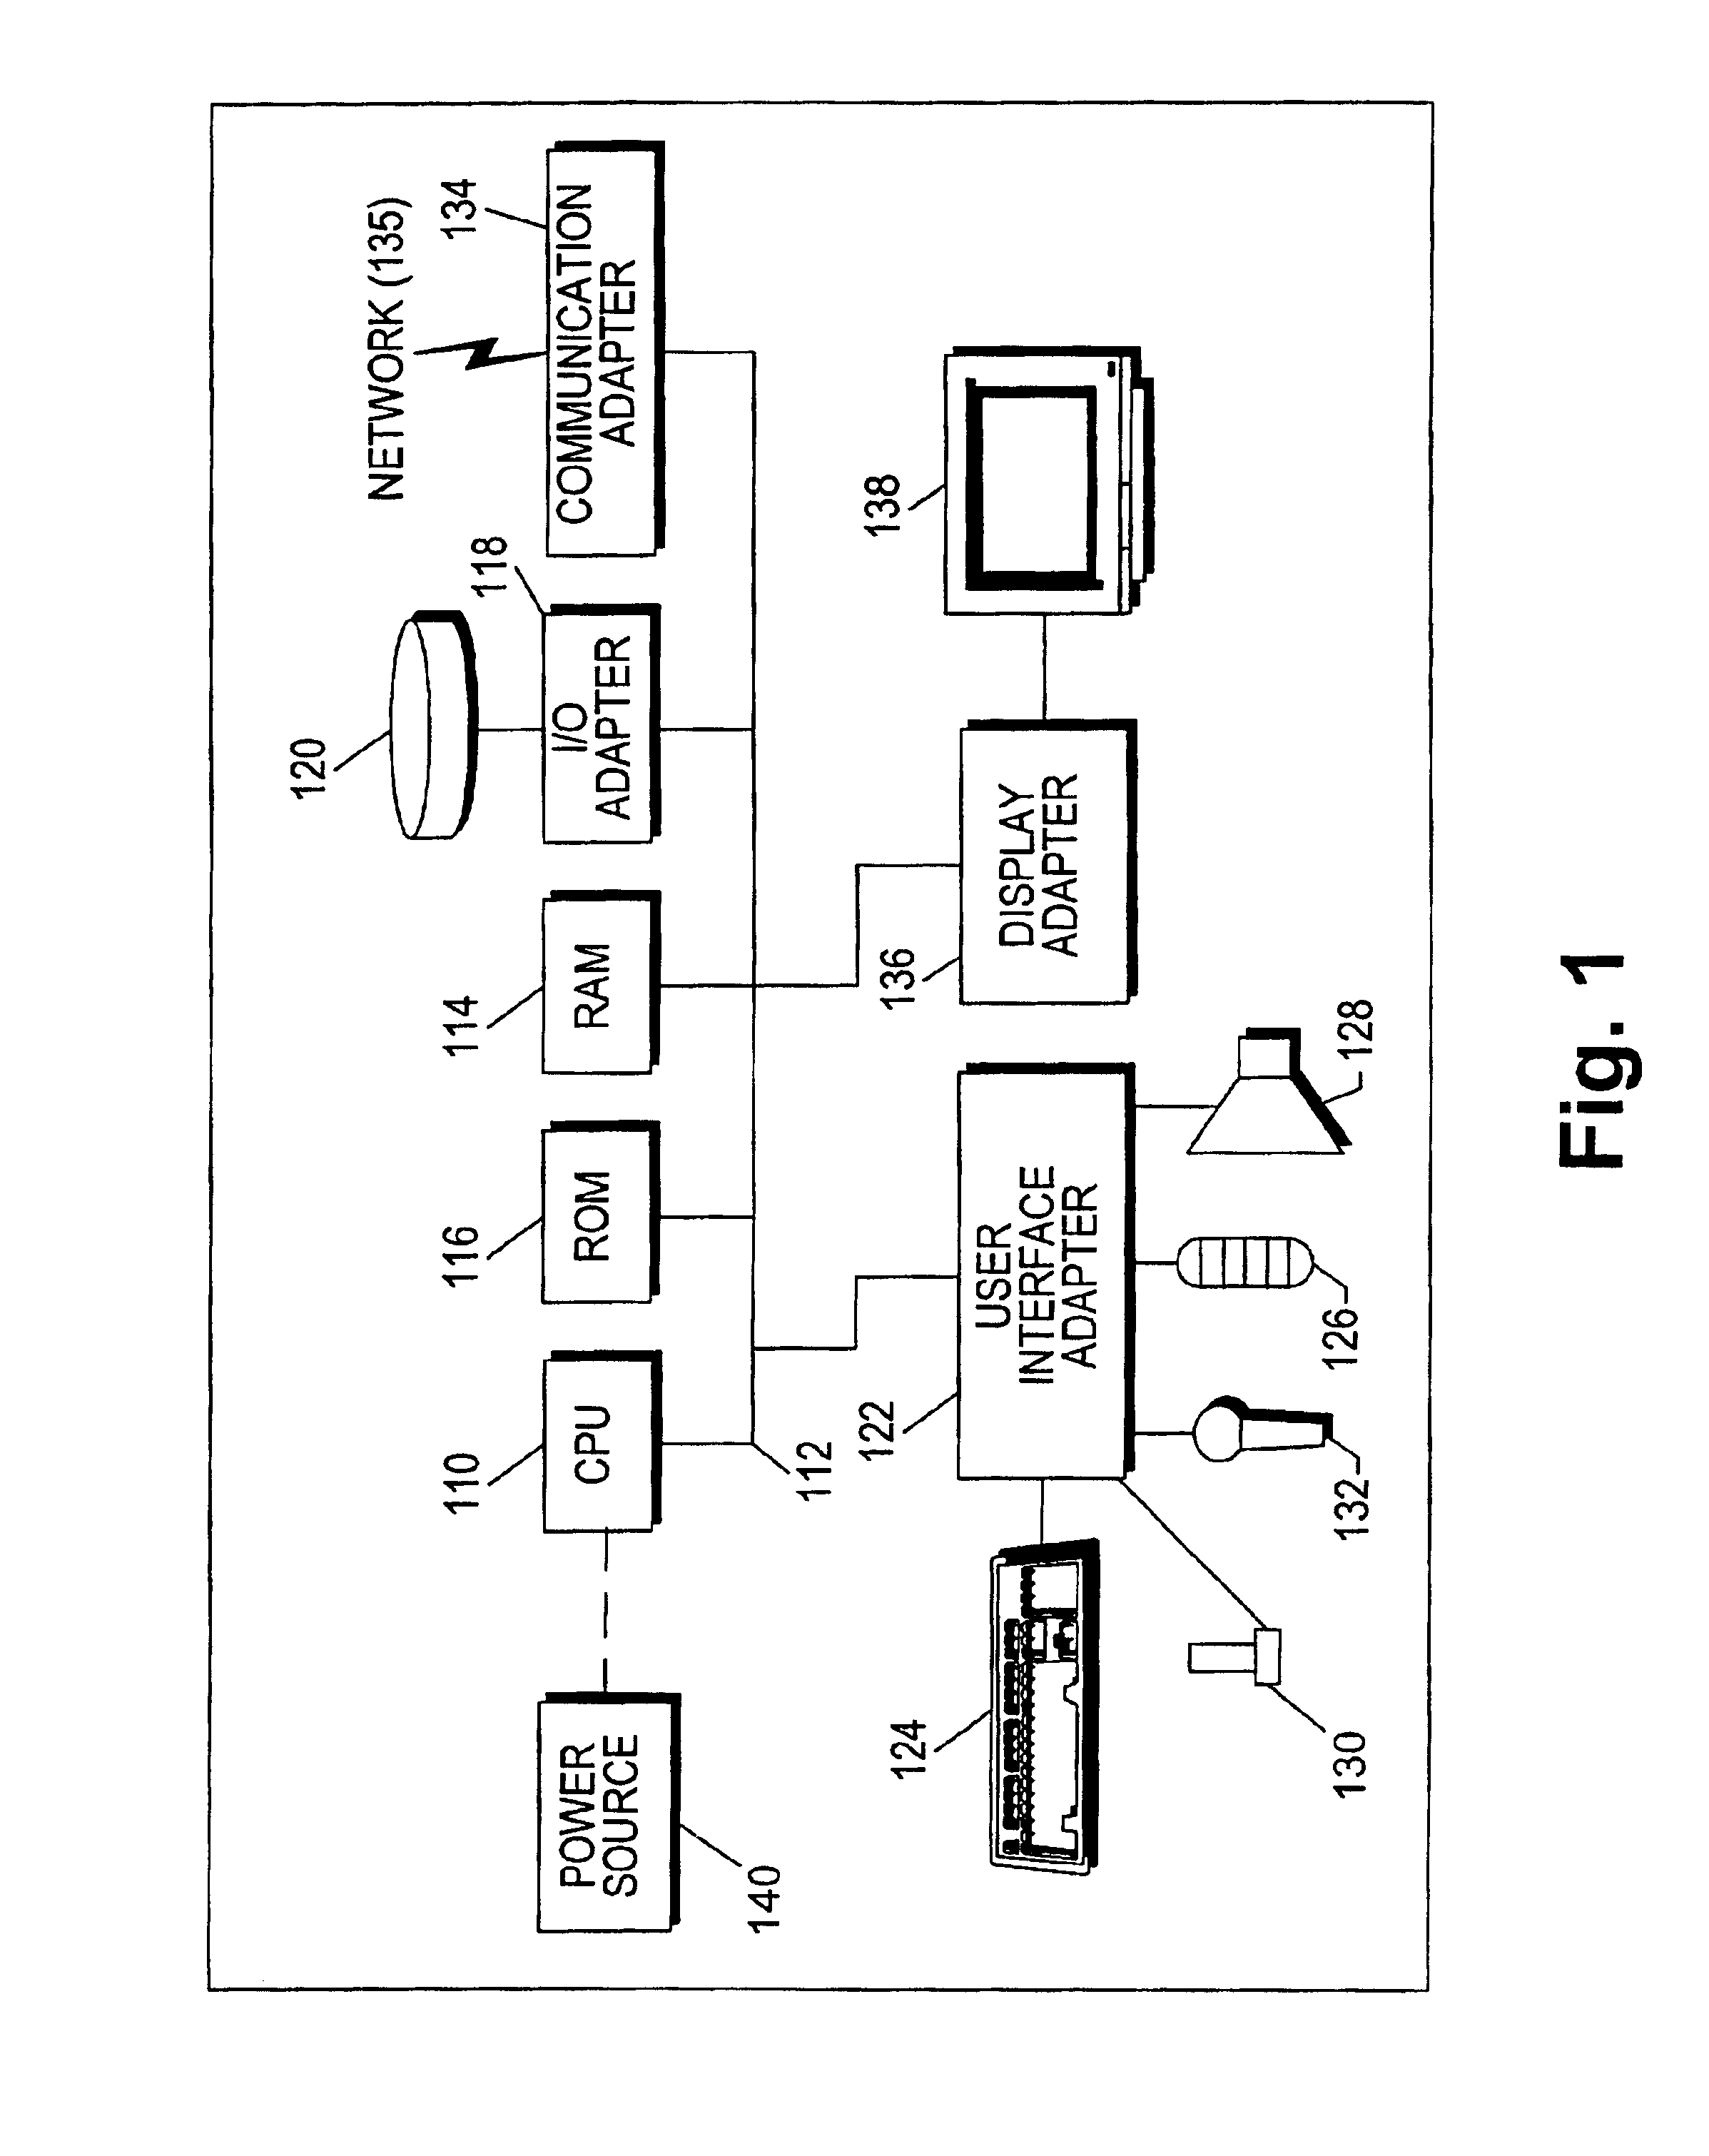 Portable device for storing and searching telephone listings, and method and computer program product for transmitting telephone information to a portable device